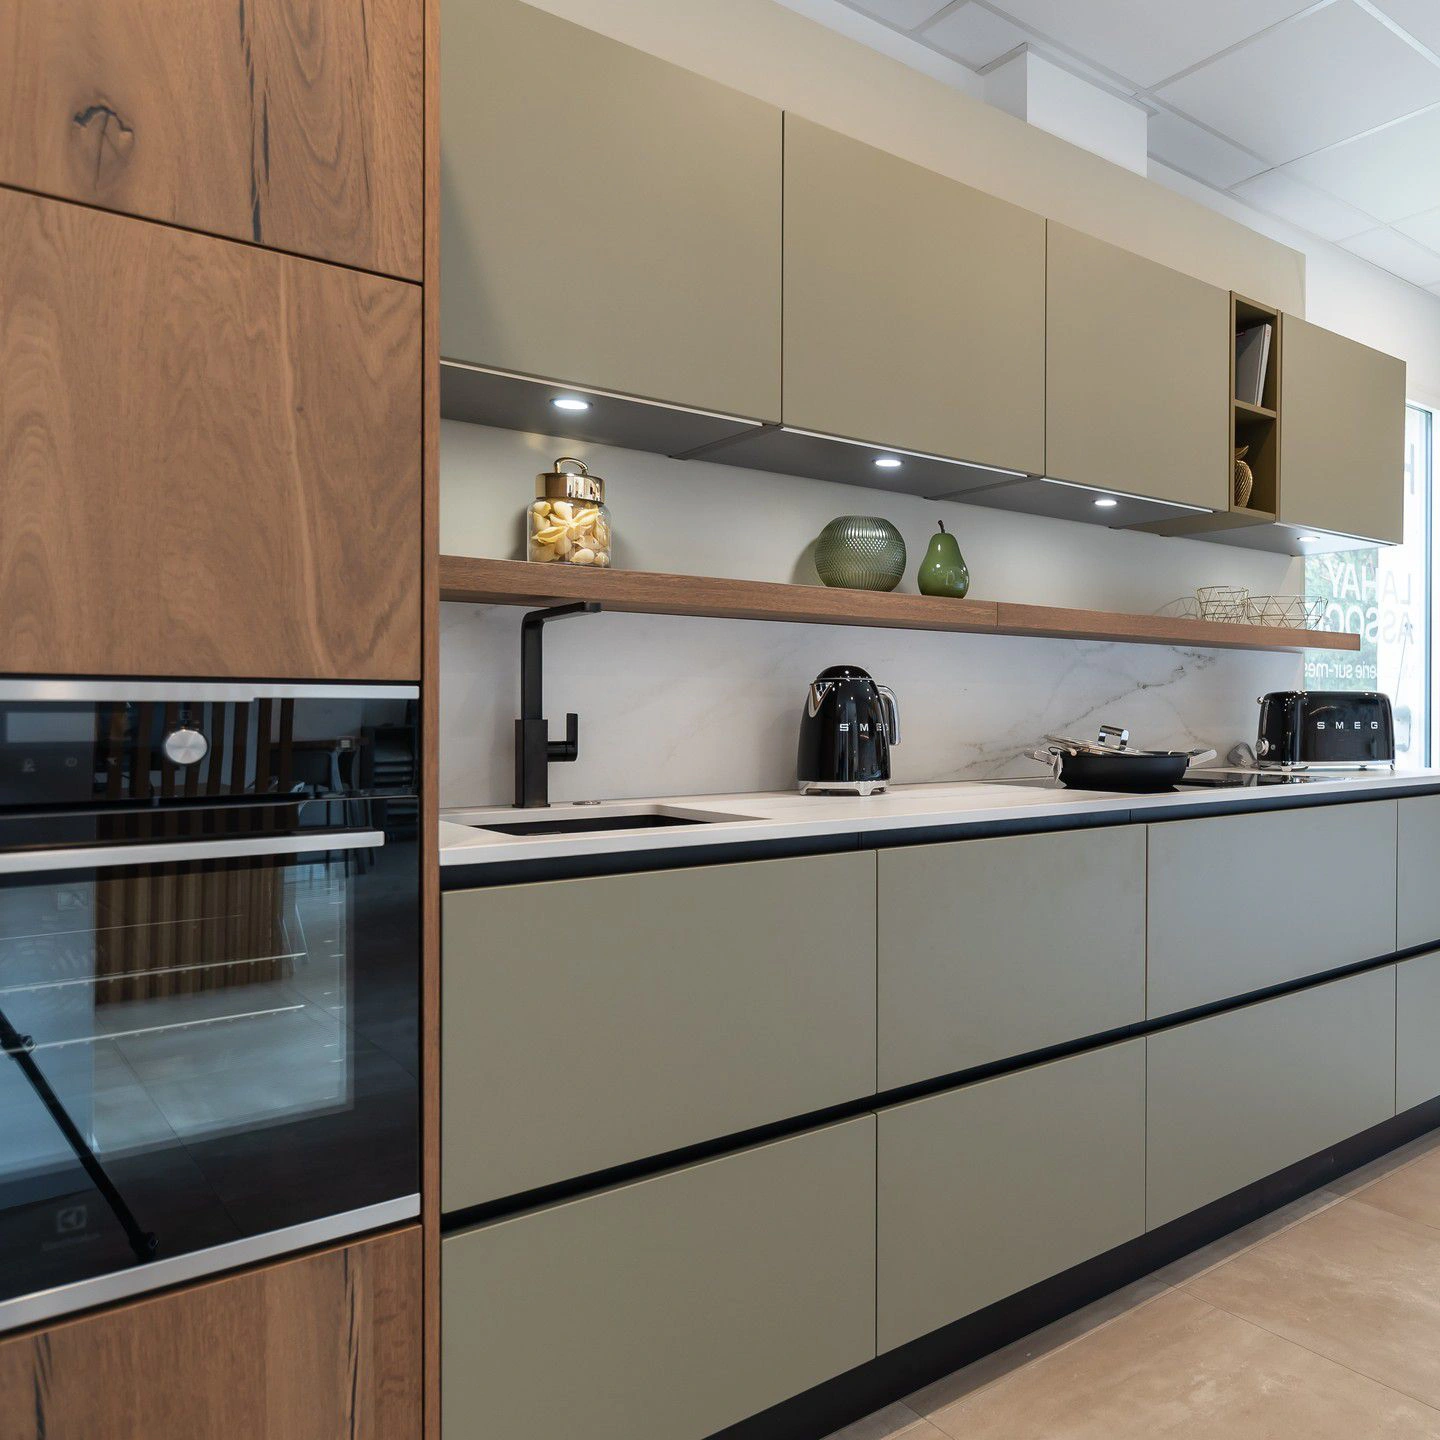 Olive grey RAL 7002 kitchen cabinets